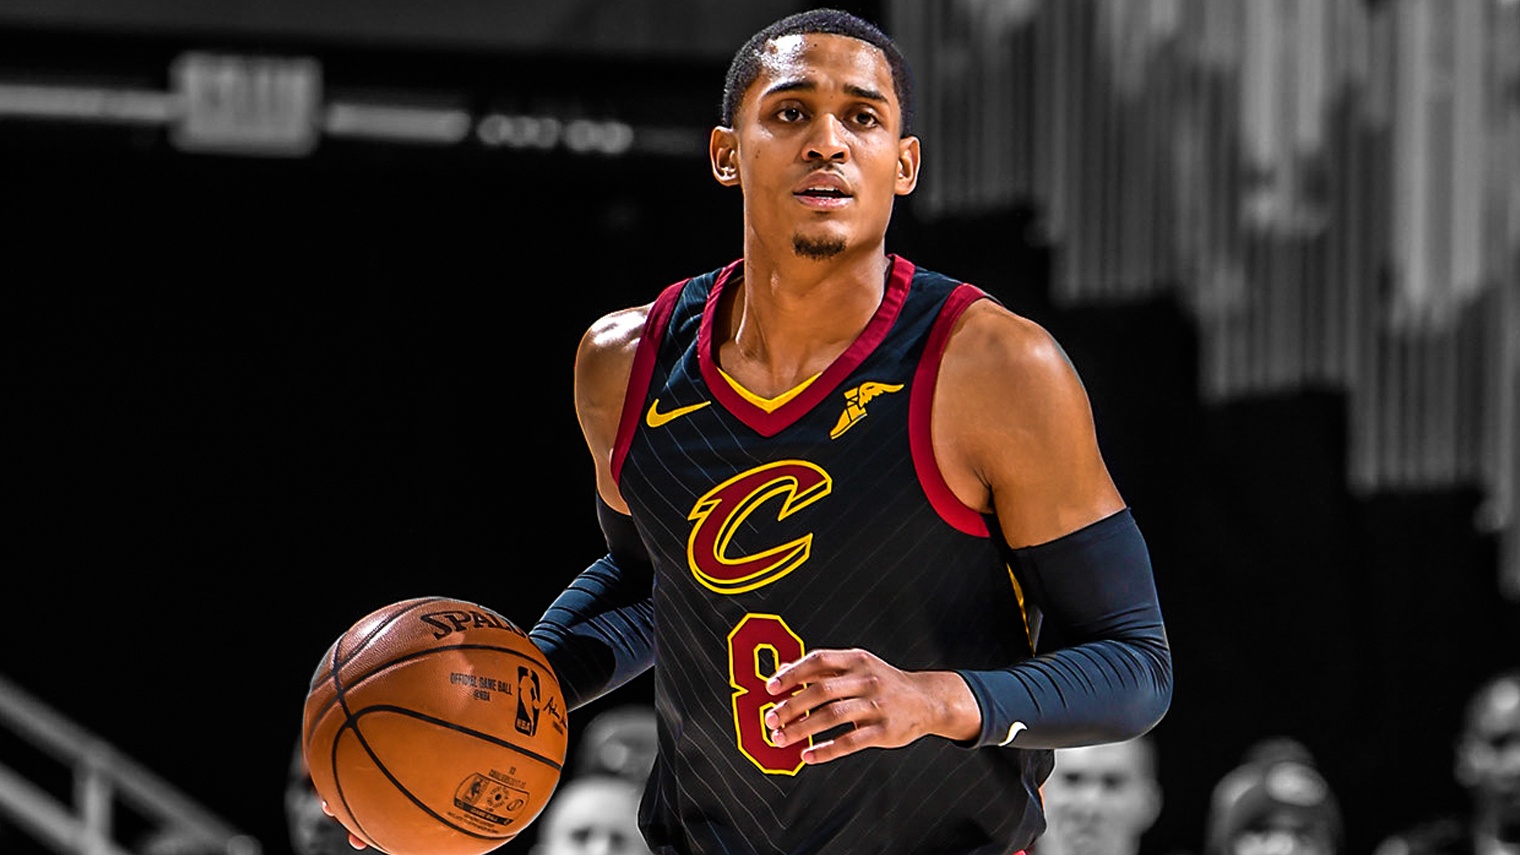 Clarkson his transition the Cleveland Cavaliers